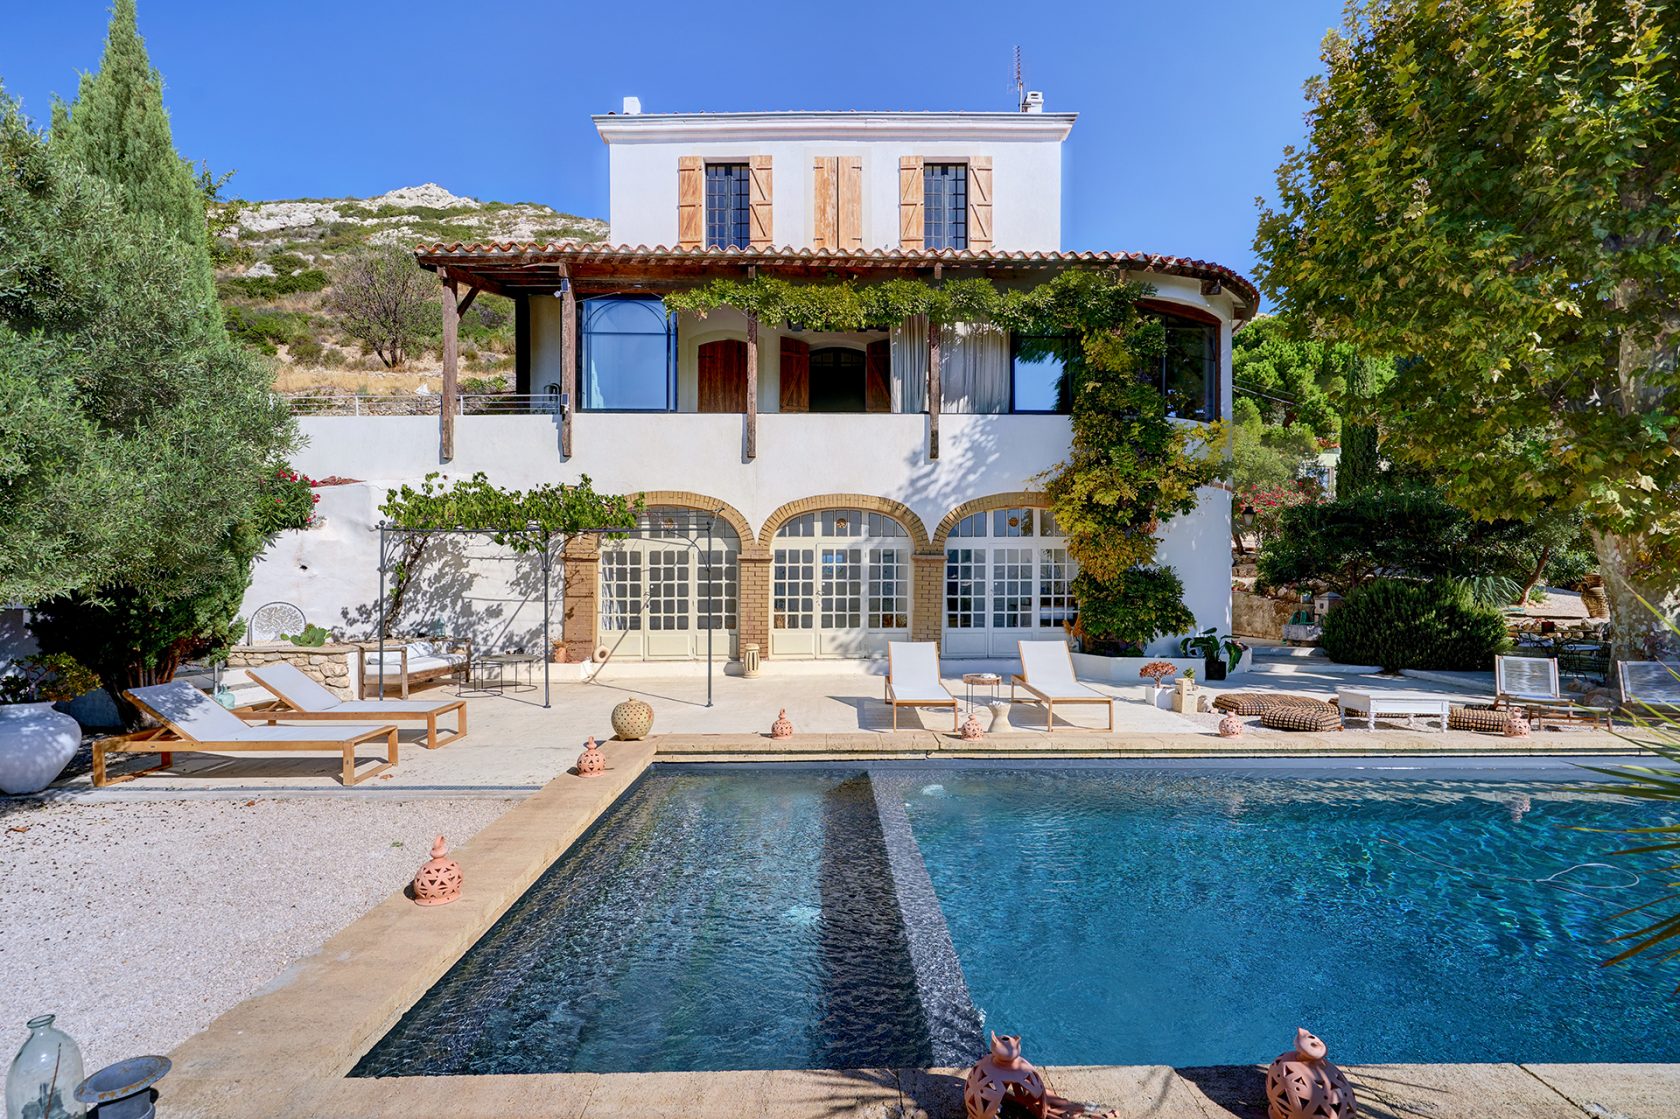 Andalusian villa with Mediterranean decoration